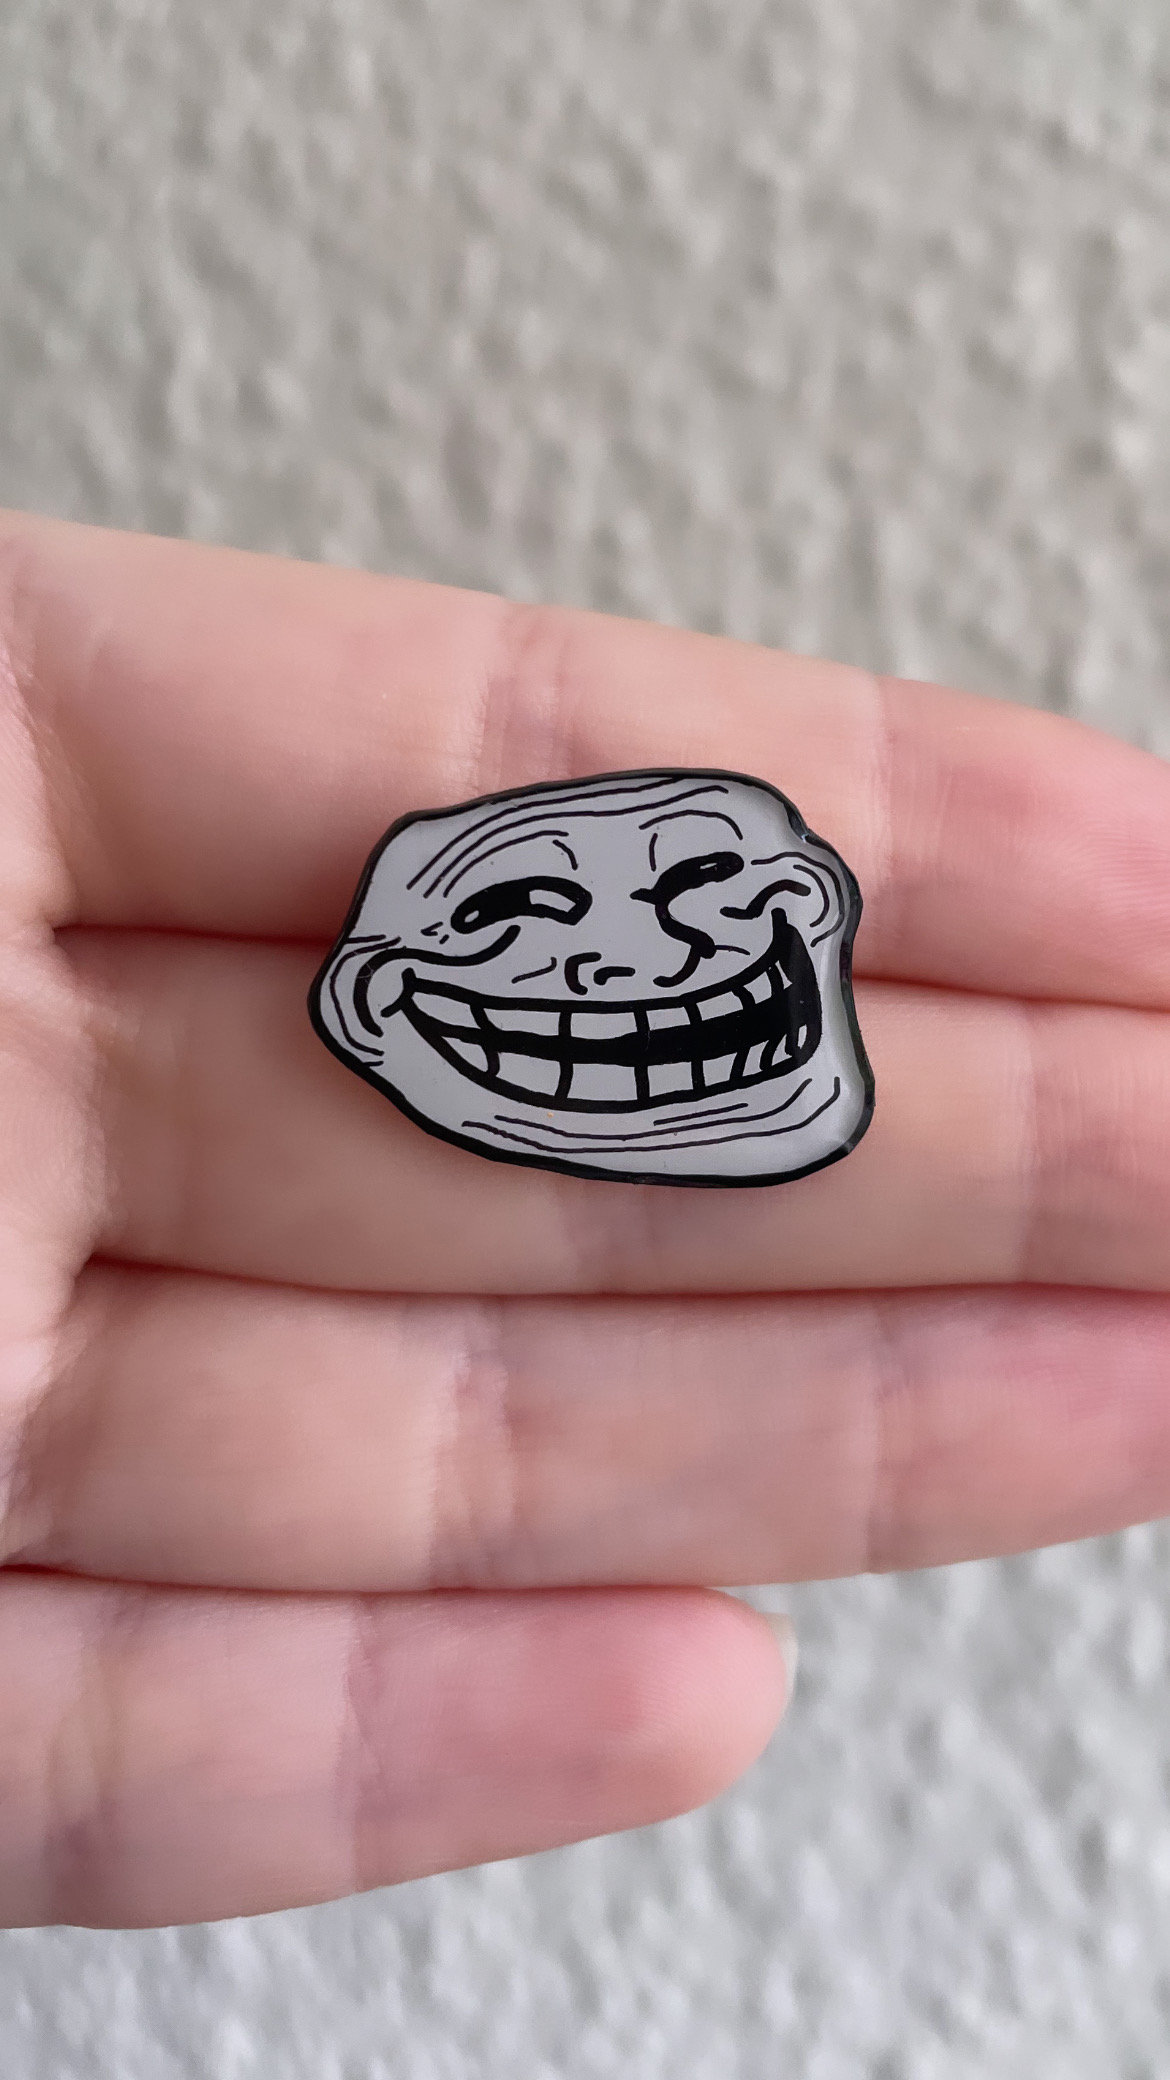 Crazy Troll Face Social Media Pin for Sale by Steelpaulo